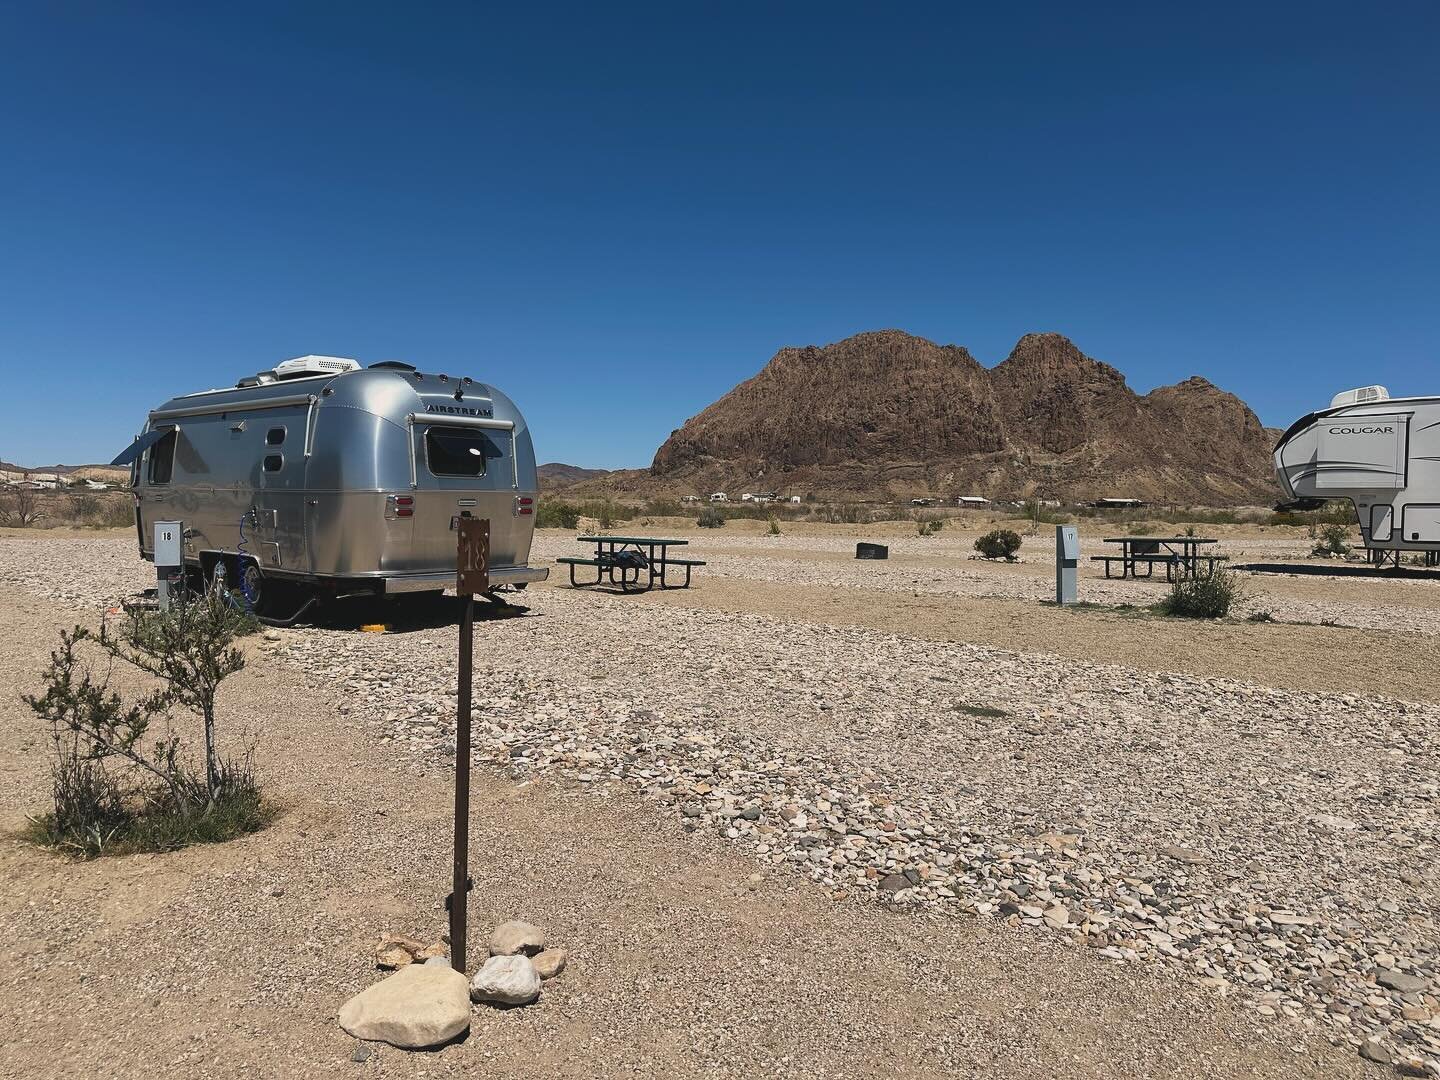 All our sites have great views of Bee Mountain, sites 15-24 are particularly nice with no other spots in front of you. #bigrigfriendly #rvlifestyle #fulltimerv #bigbendnationalpark #bigbendstatepark